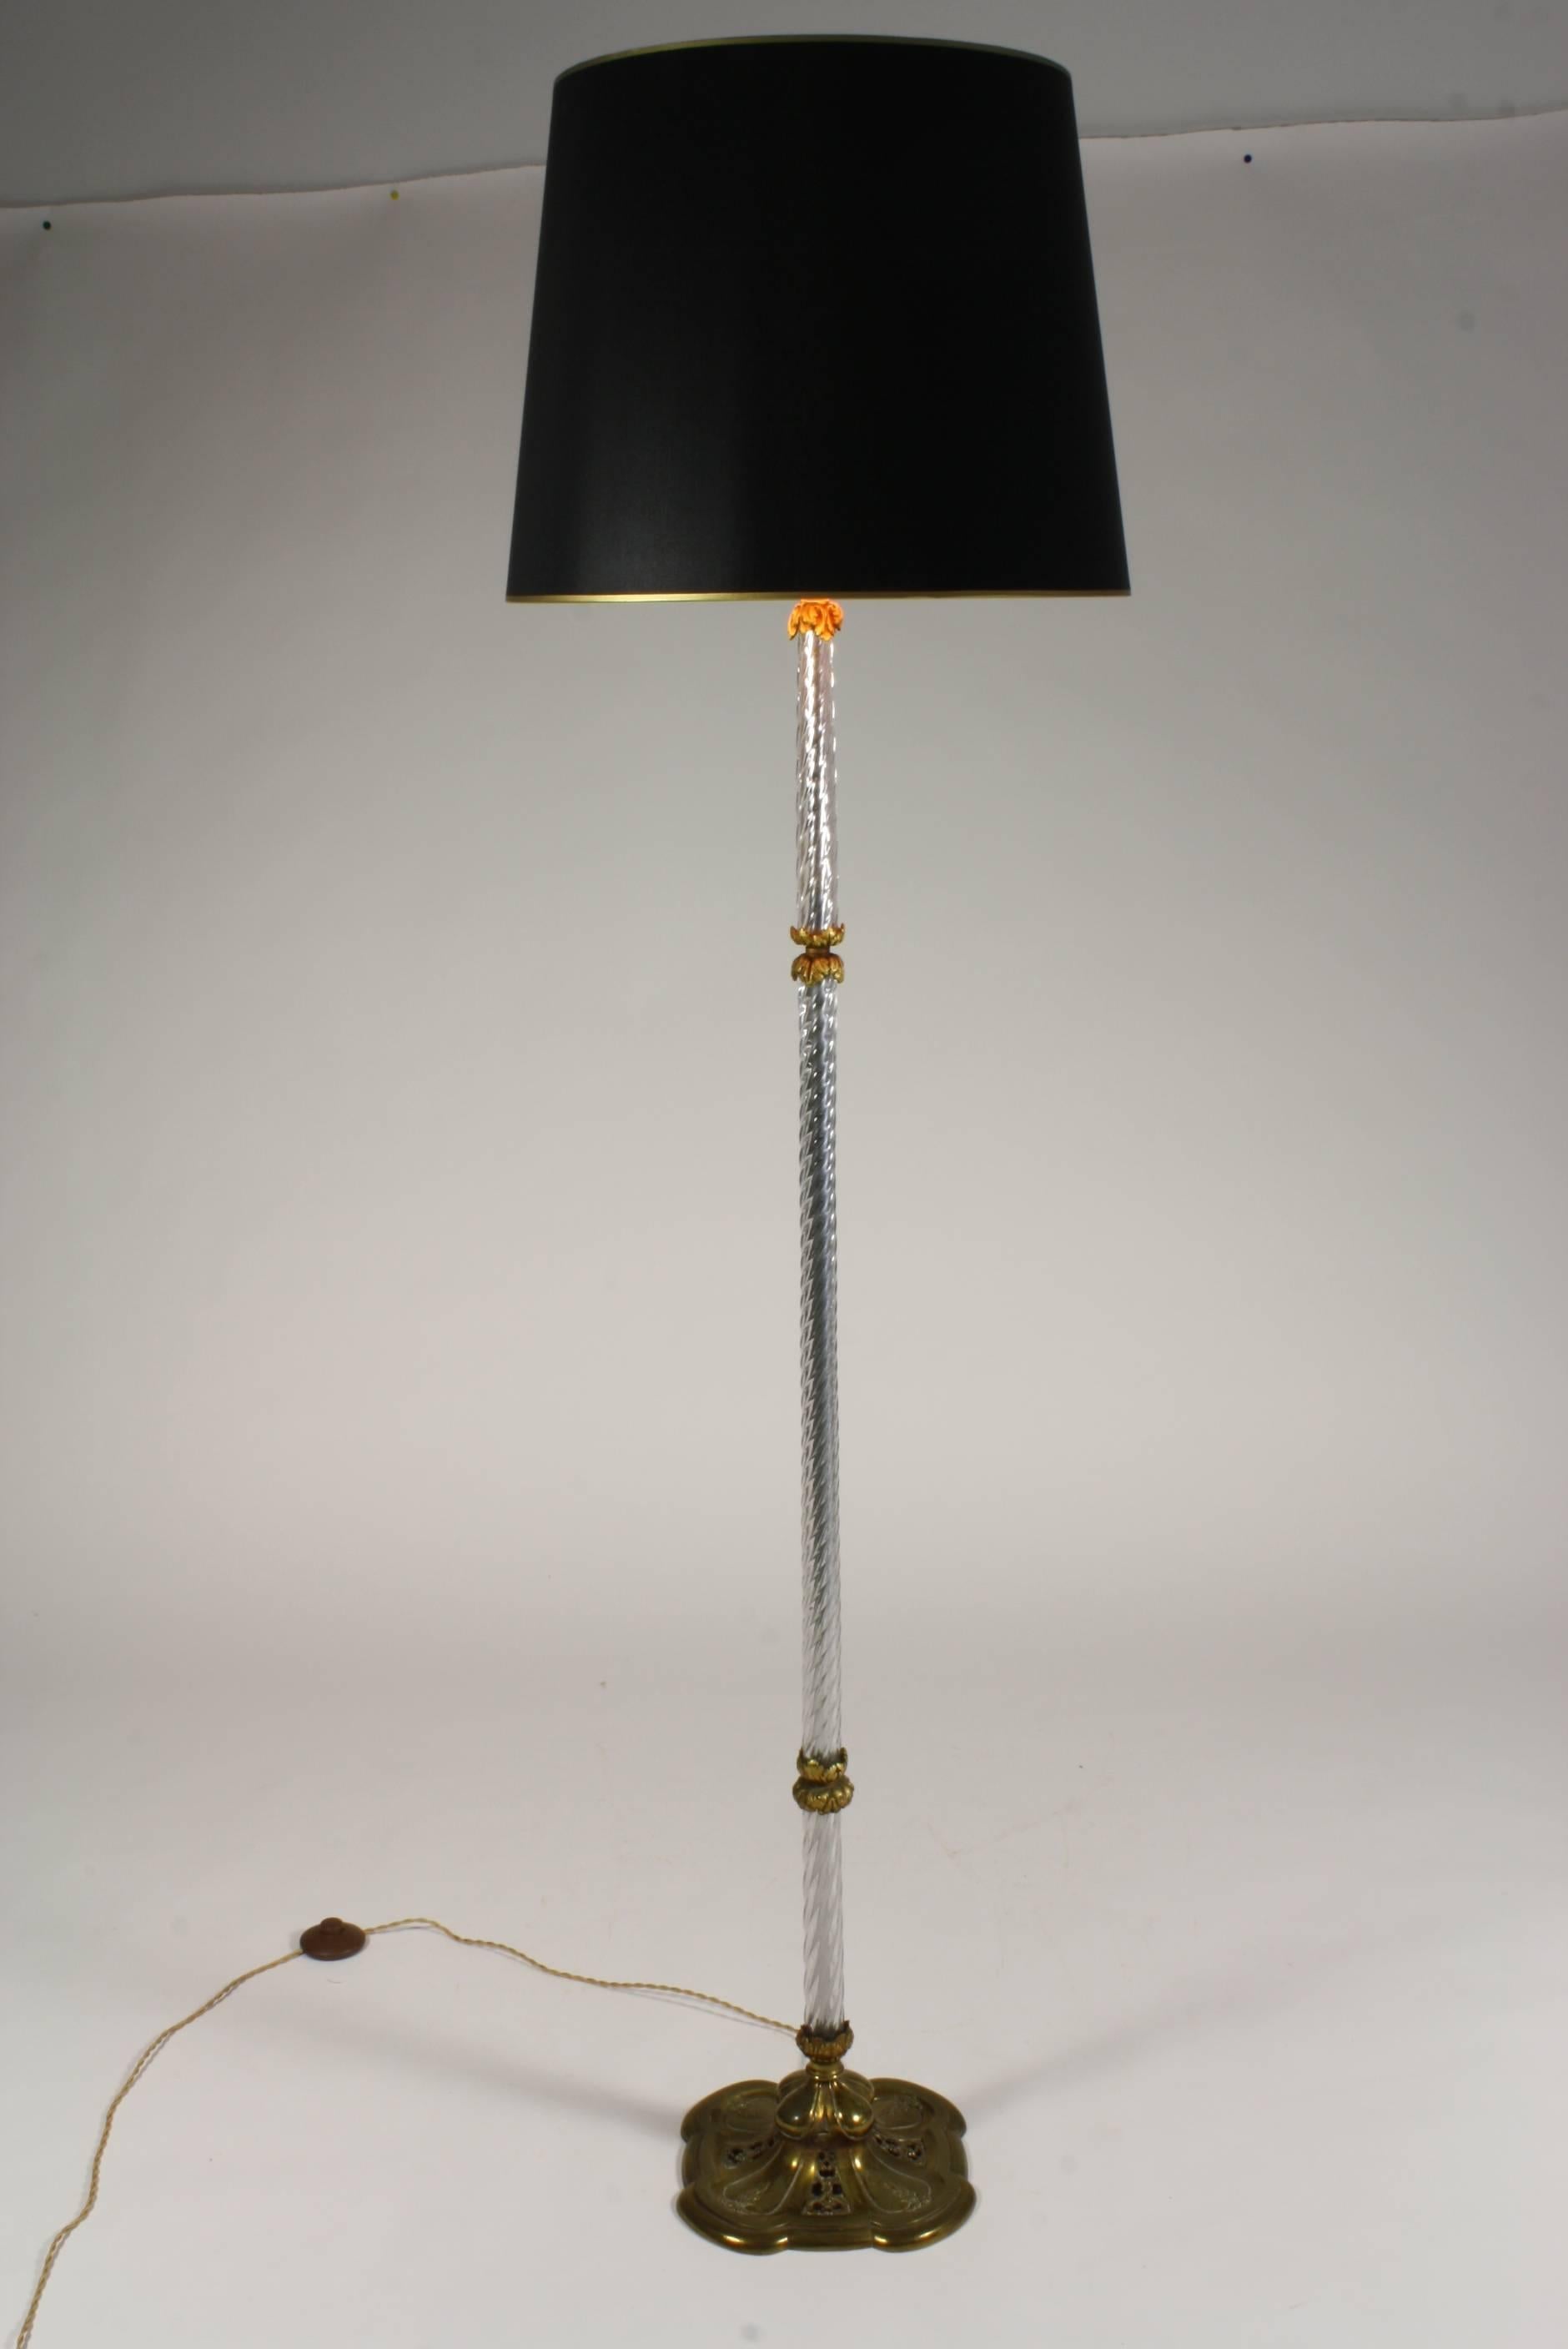 French twisted glass column floor lamp with bronze acanthus leaf mounts and decorative pierced bronze base.  New shade in black silk over gold paper interior with gold trim.  The lamp base is 10.75